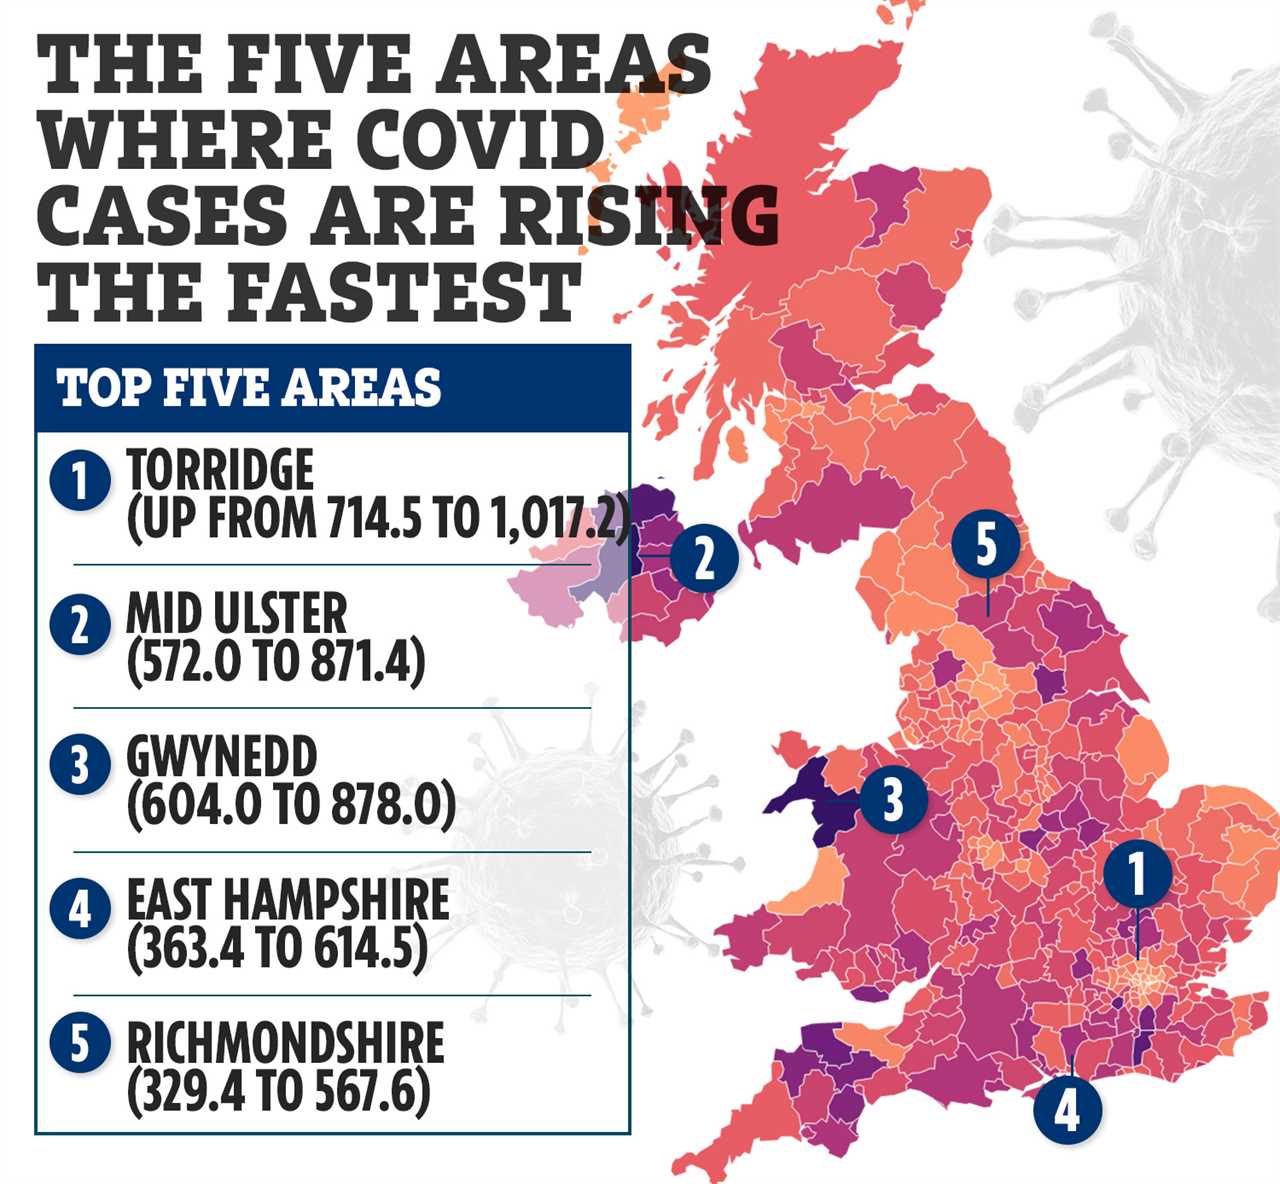 Covid cases are rising in 298 areas – is YOURS on the hotspot list?